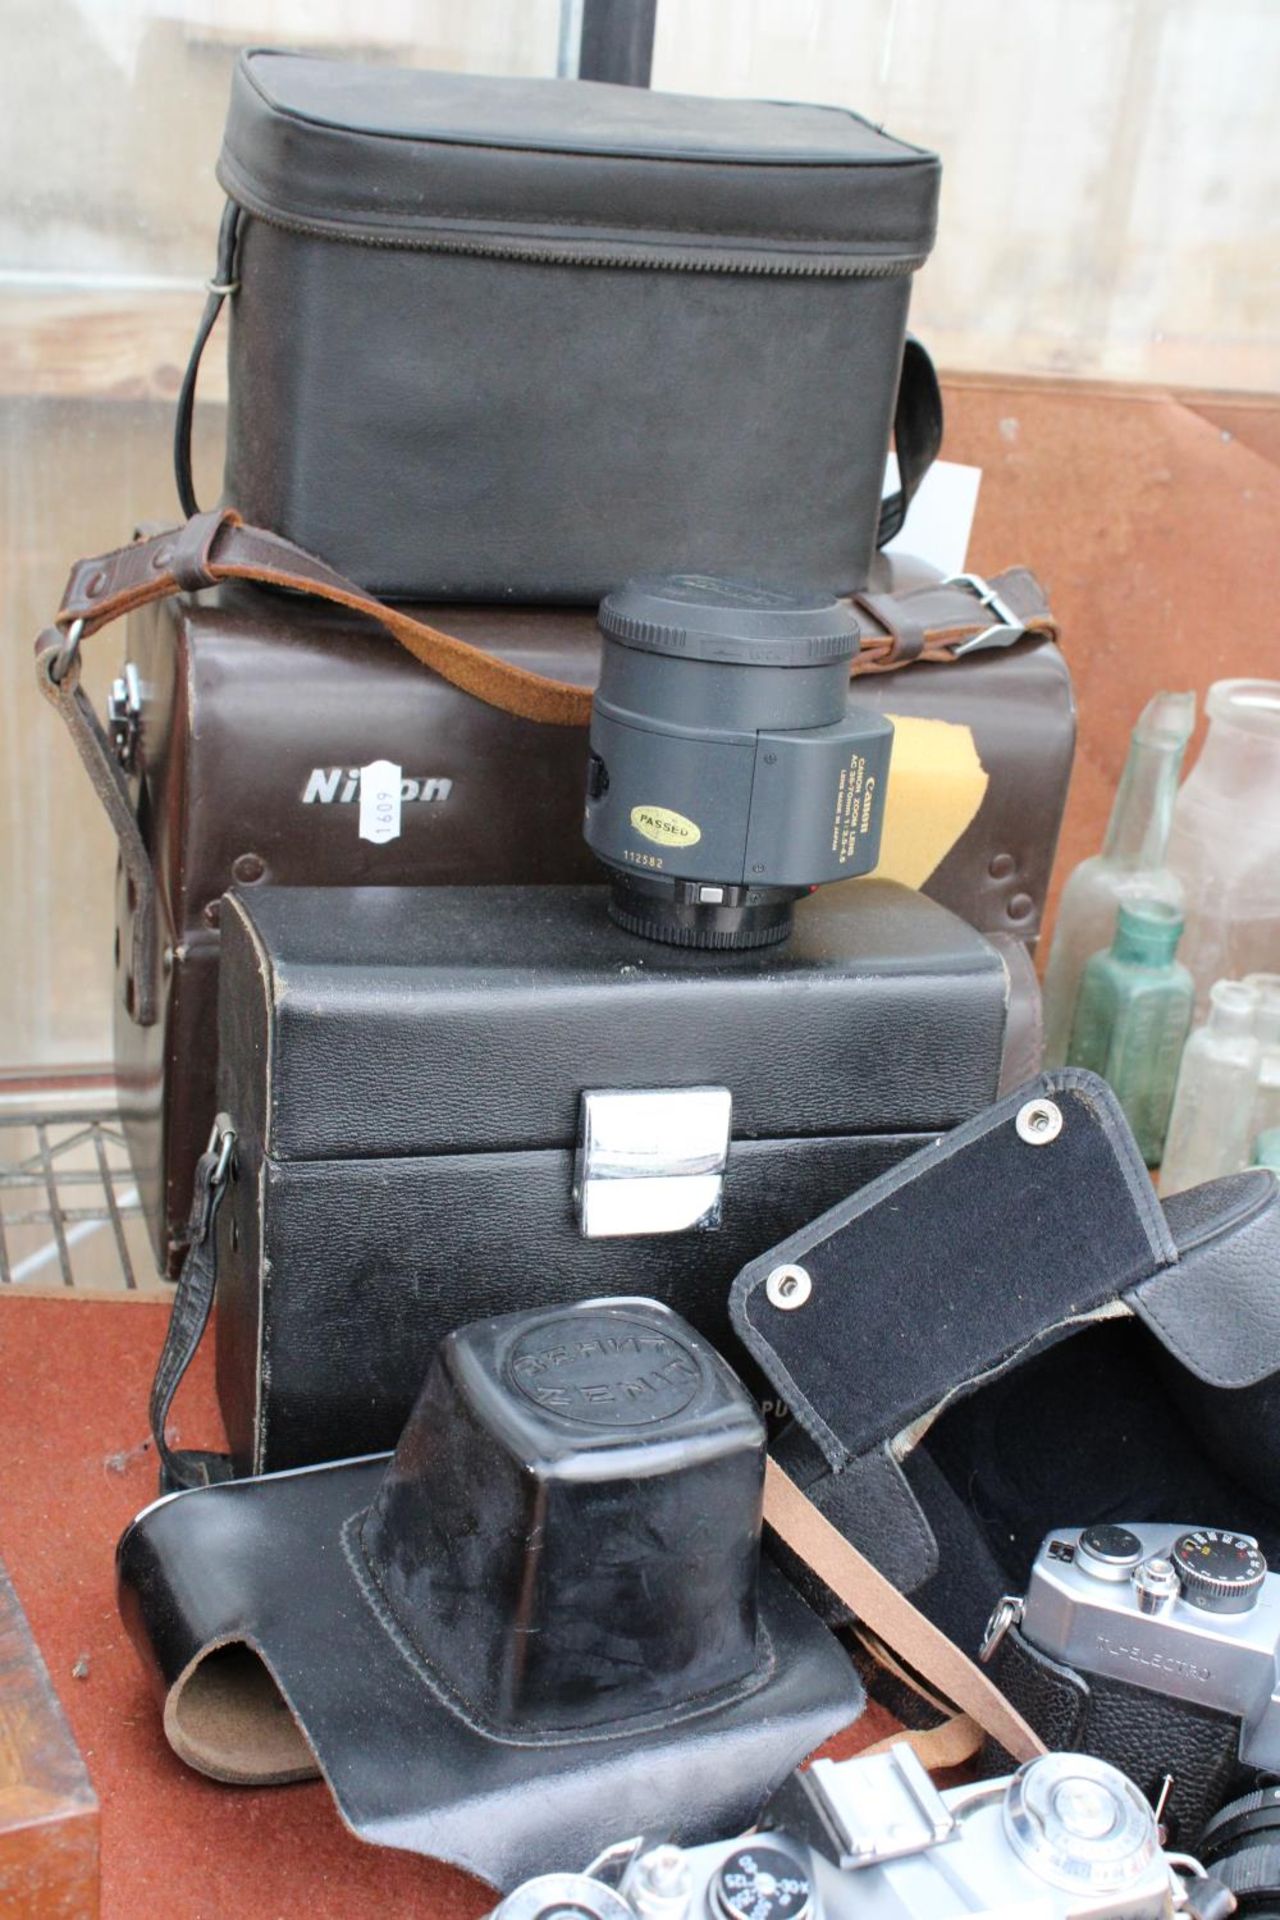 AN ASSORTMENT OF CAMERA EQUIPMENT TO INCLUDE A ZENIT CAMERA, YASHICA CAMERA AND A CANON ZOOM LENS - Image 2 of 3